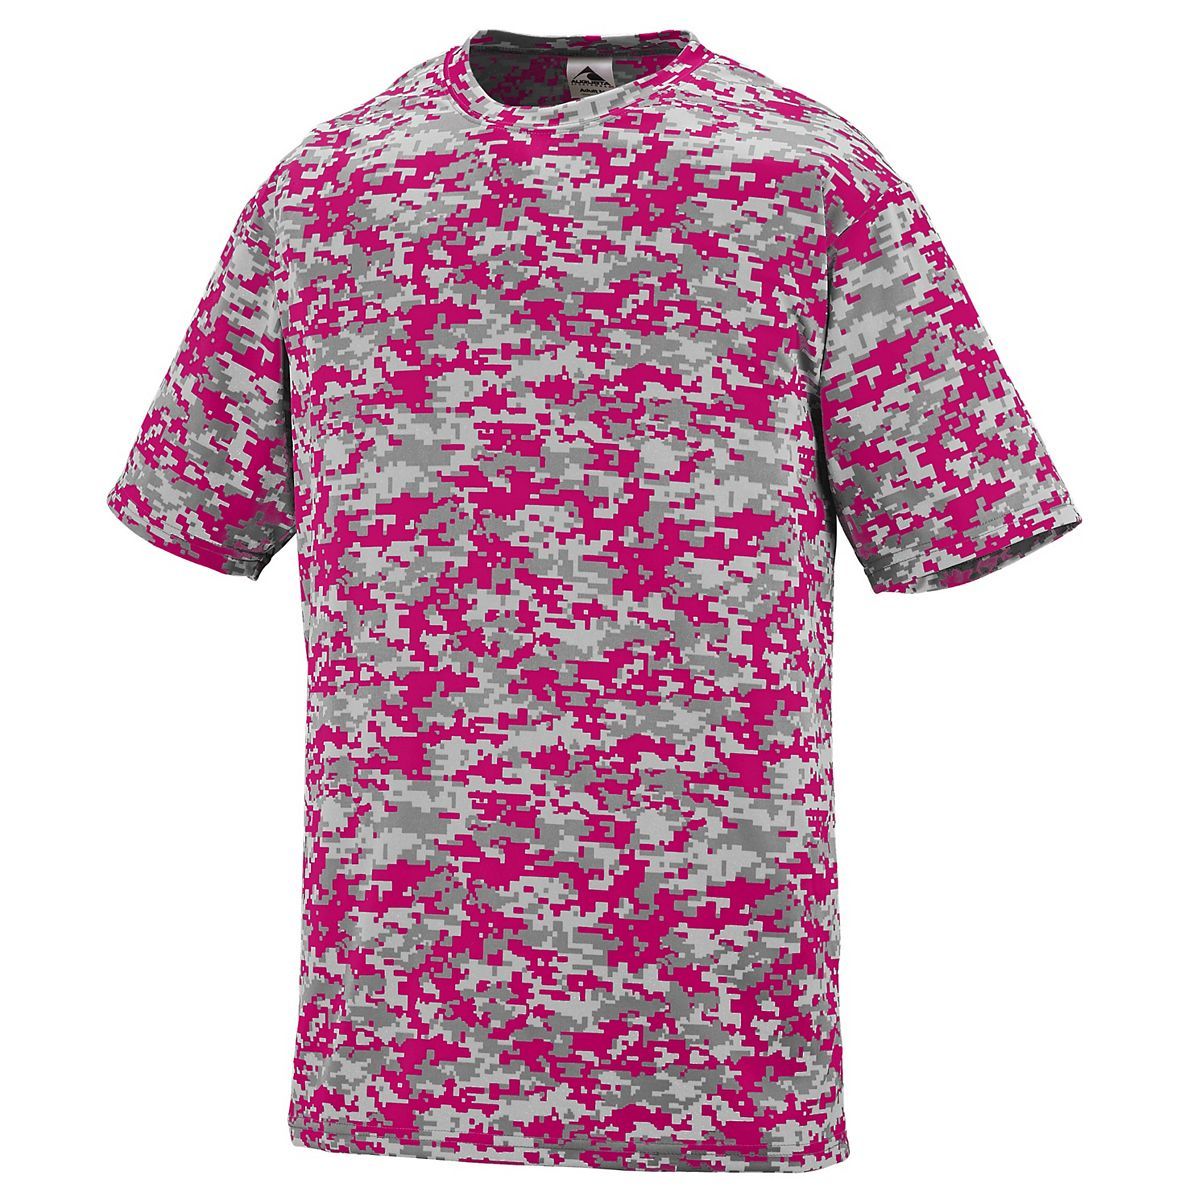 Augusta Sportswear Youth Digi Camo Wicking T-Shirt in Power Pink Digi  -Part of the Youth, Youth-Tee-Shirt, T-Shirts, Augusta-Products, Shirts product lines at KanaleyCreations.com